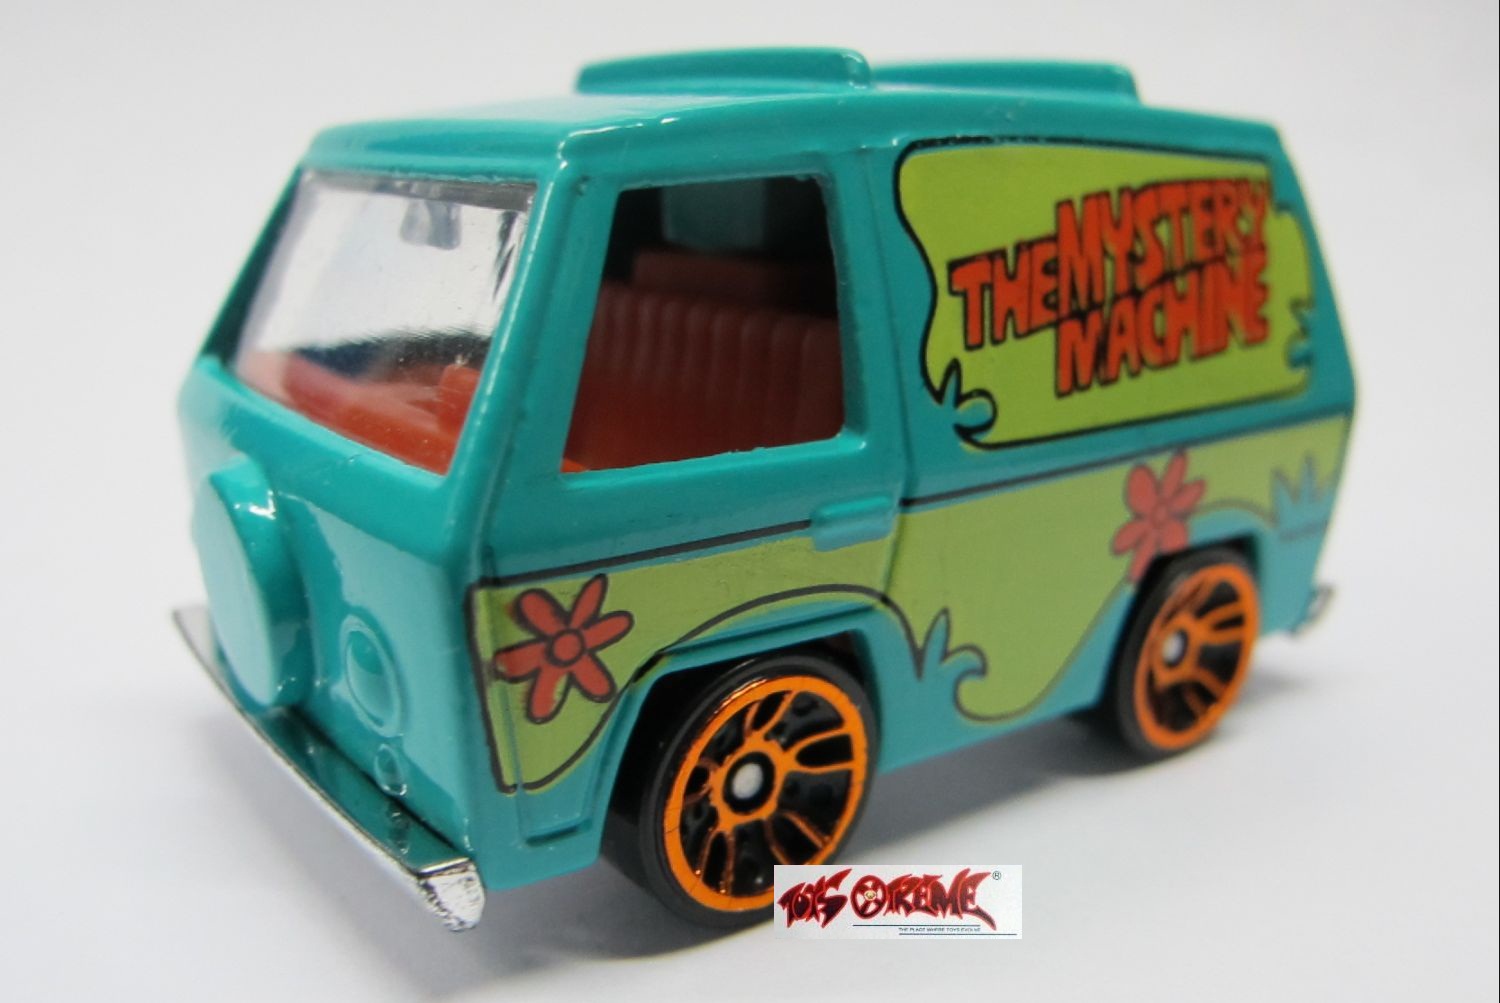 https://static.wikia.nocookie.net/hotwheels/images/5/56/The_Mystery_Machine-1.jpg/revision/latest?cb=20120718095425